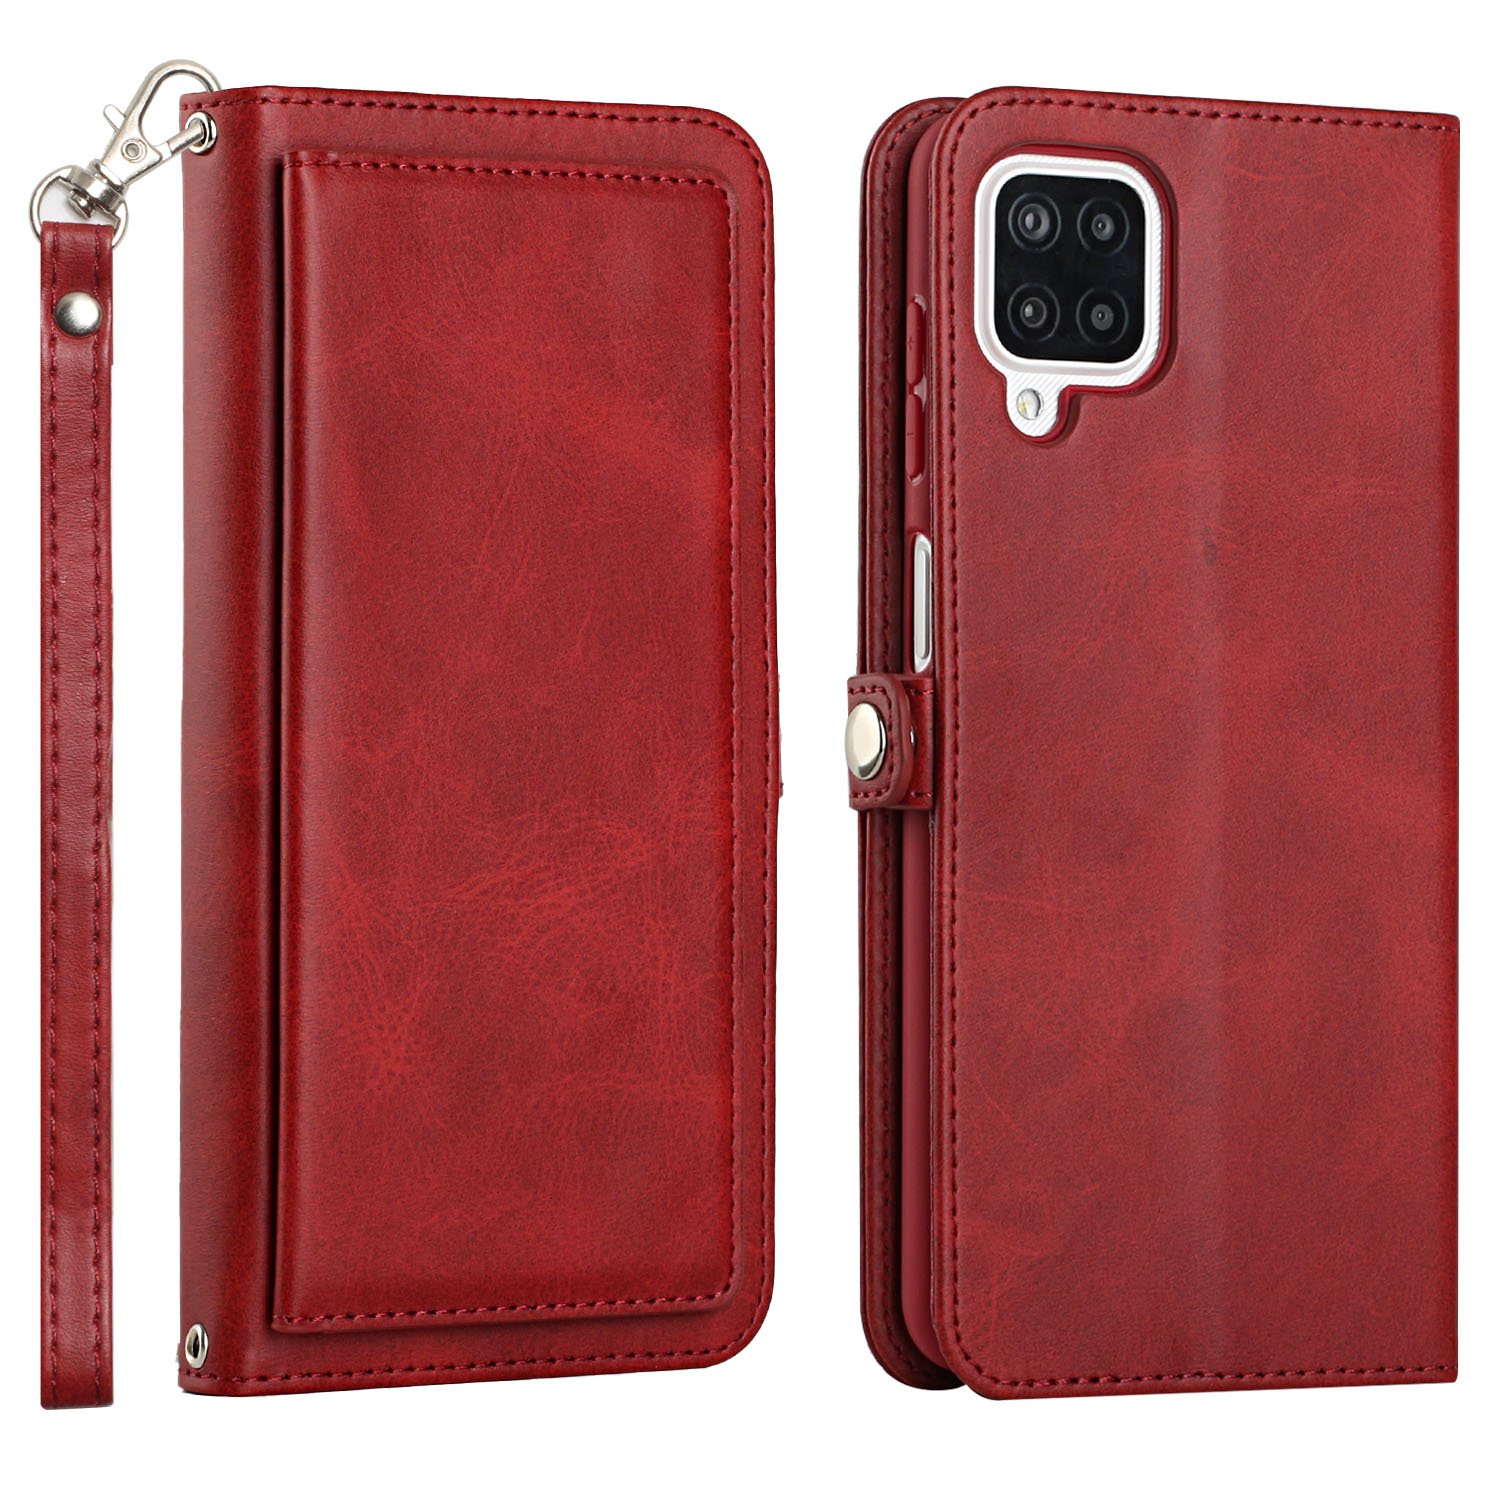 Premium PU Leather Folio WALLET Front Cover Case for Galaxy A12 (Red)